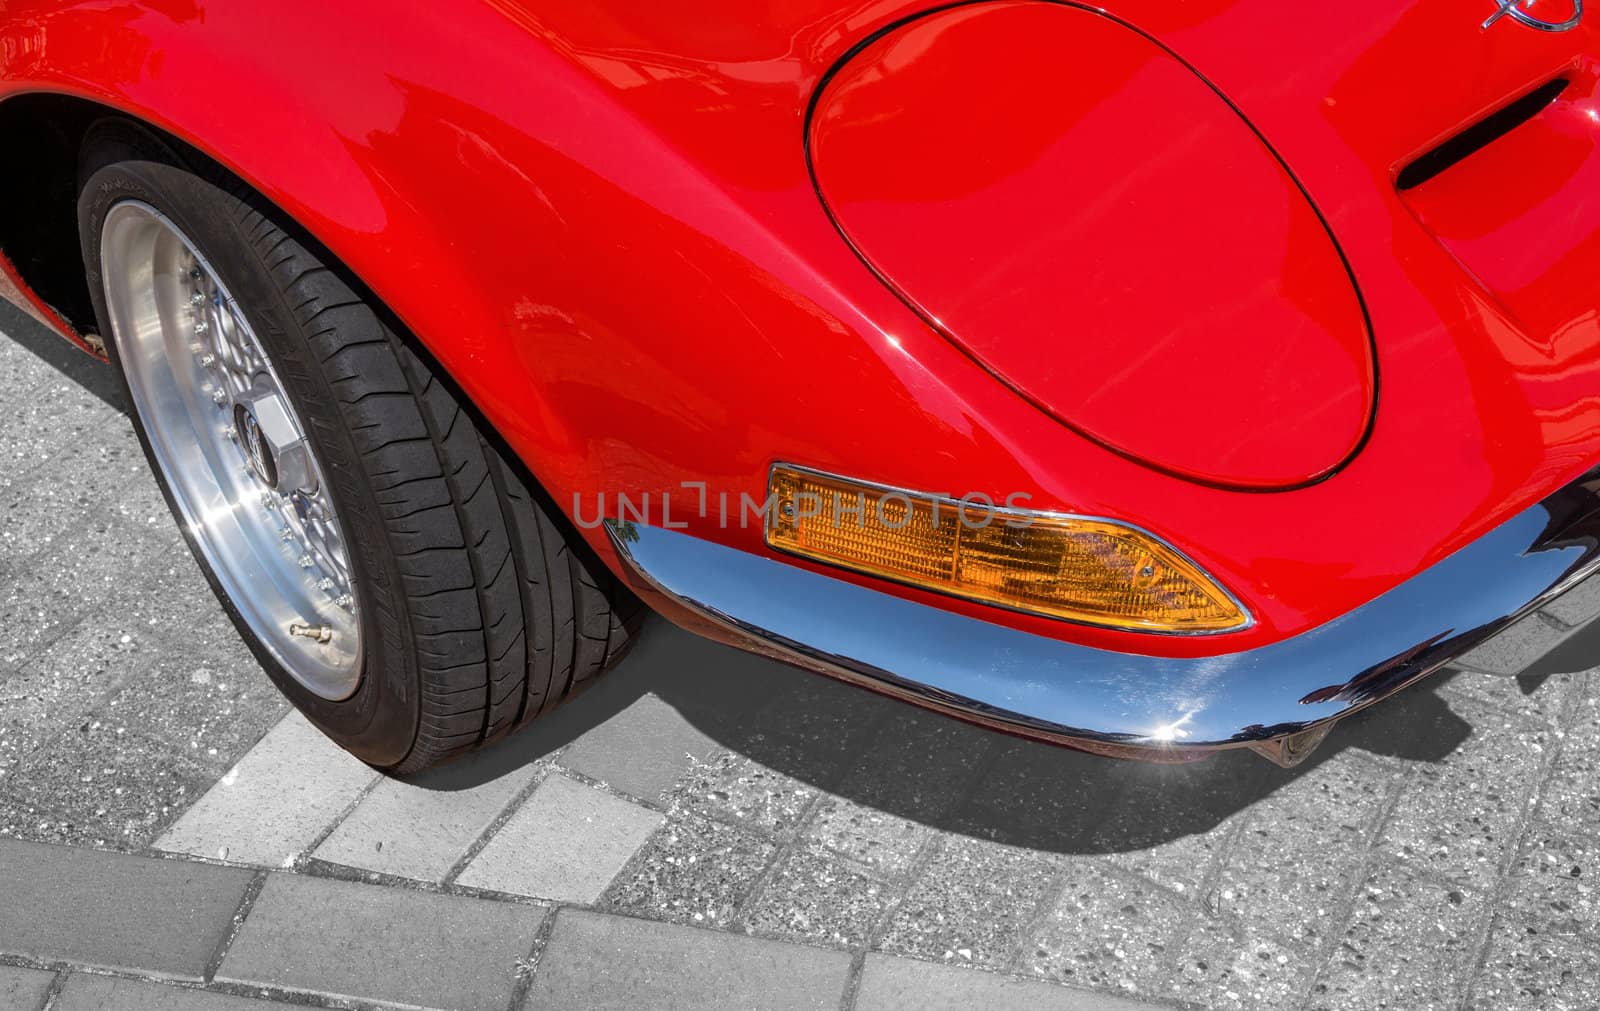 Detail view, from the right front corner of a red sports car with folding headlights, indicators,. bumper and a part of the front wheel, Germany